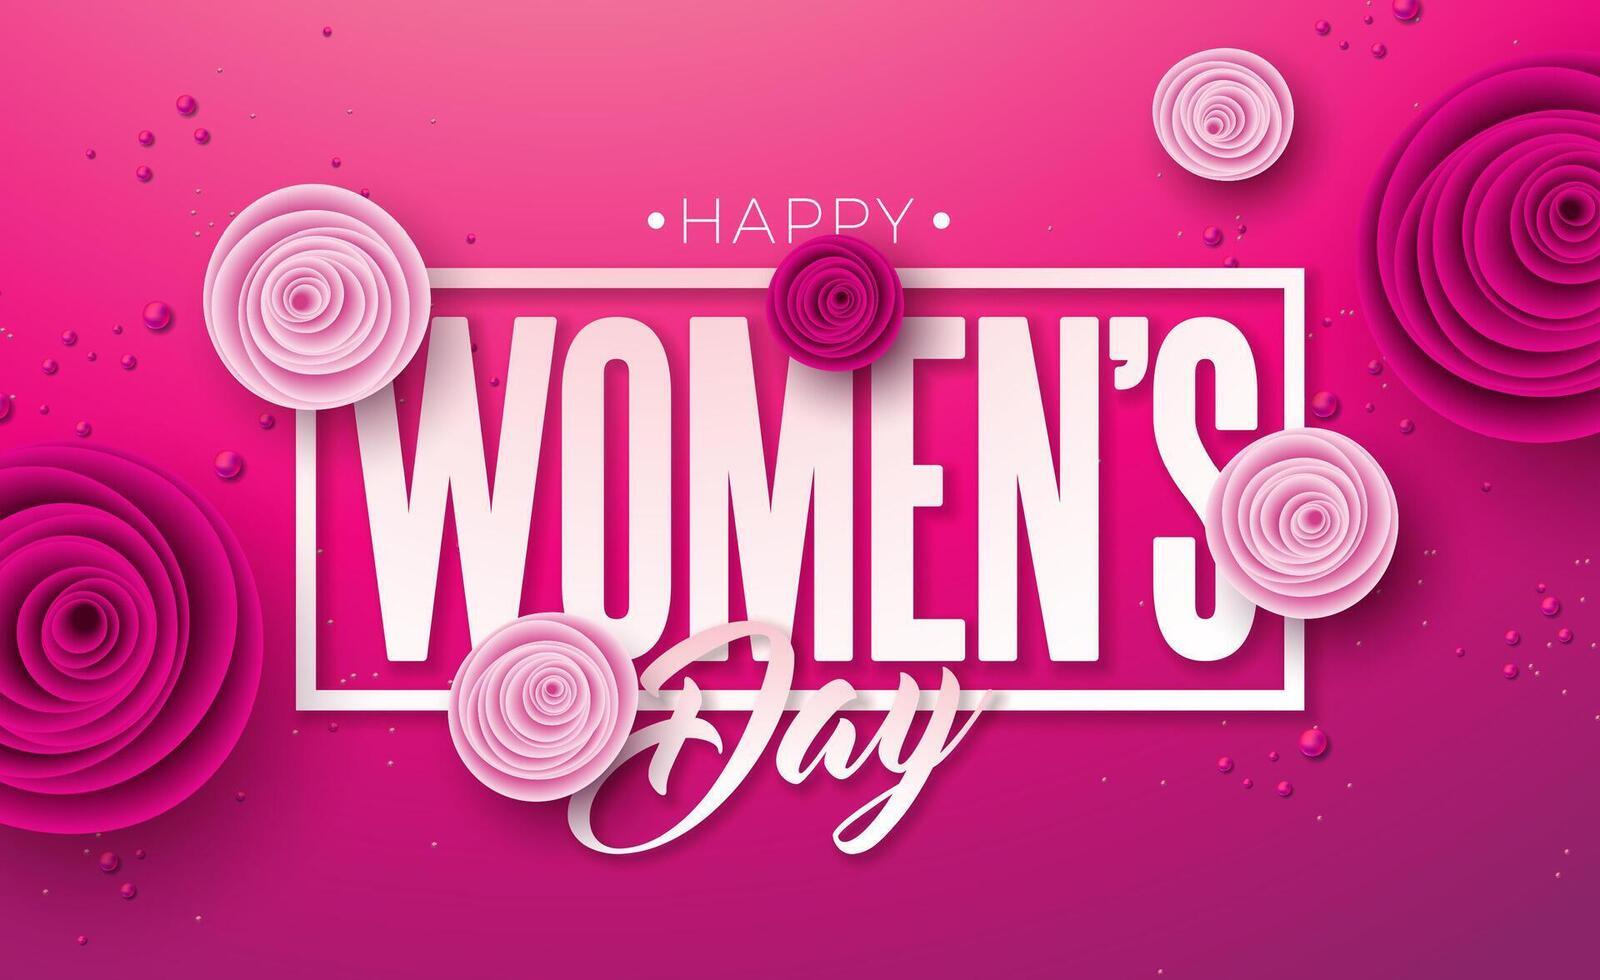 8 March. Happy Women's Day Floral Illustration. International Womens Day Vector Design with Rose Flower and Typography Letter on Pink Background. Woman or Mother Day Theme Template for Flyer, Greeting